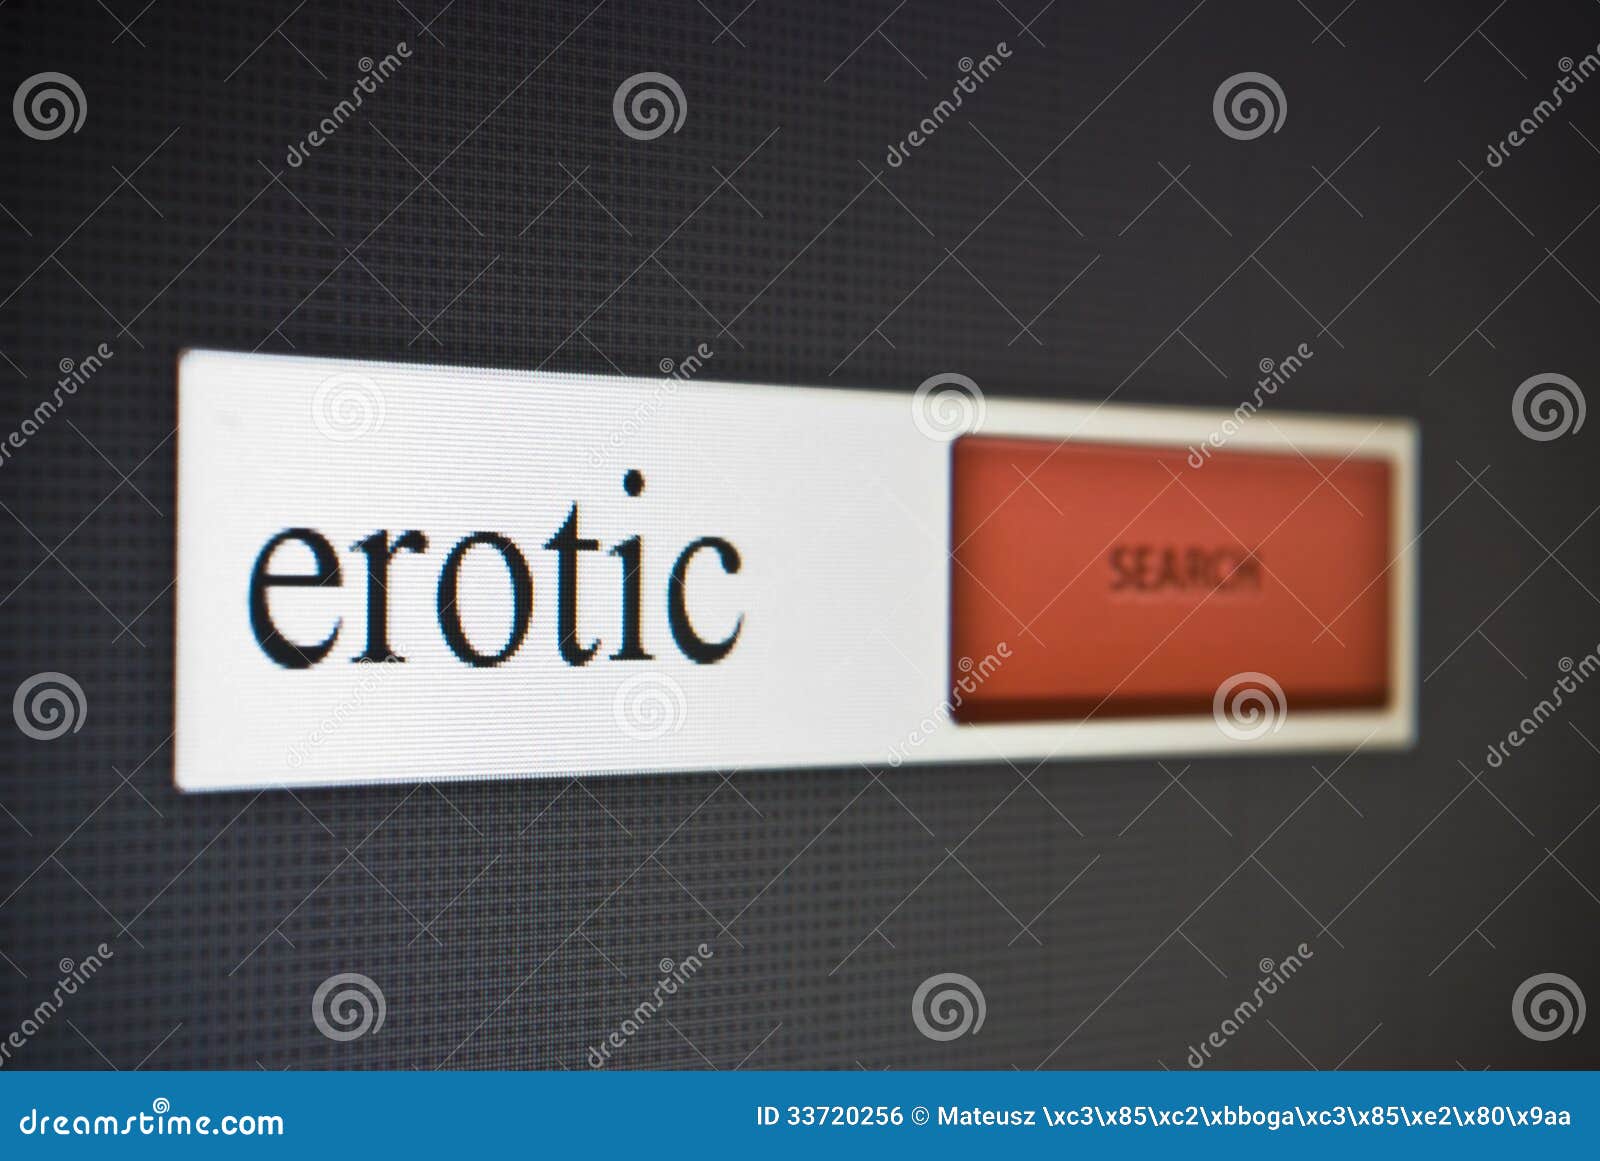 internet search bar with phrase erotic